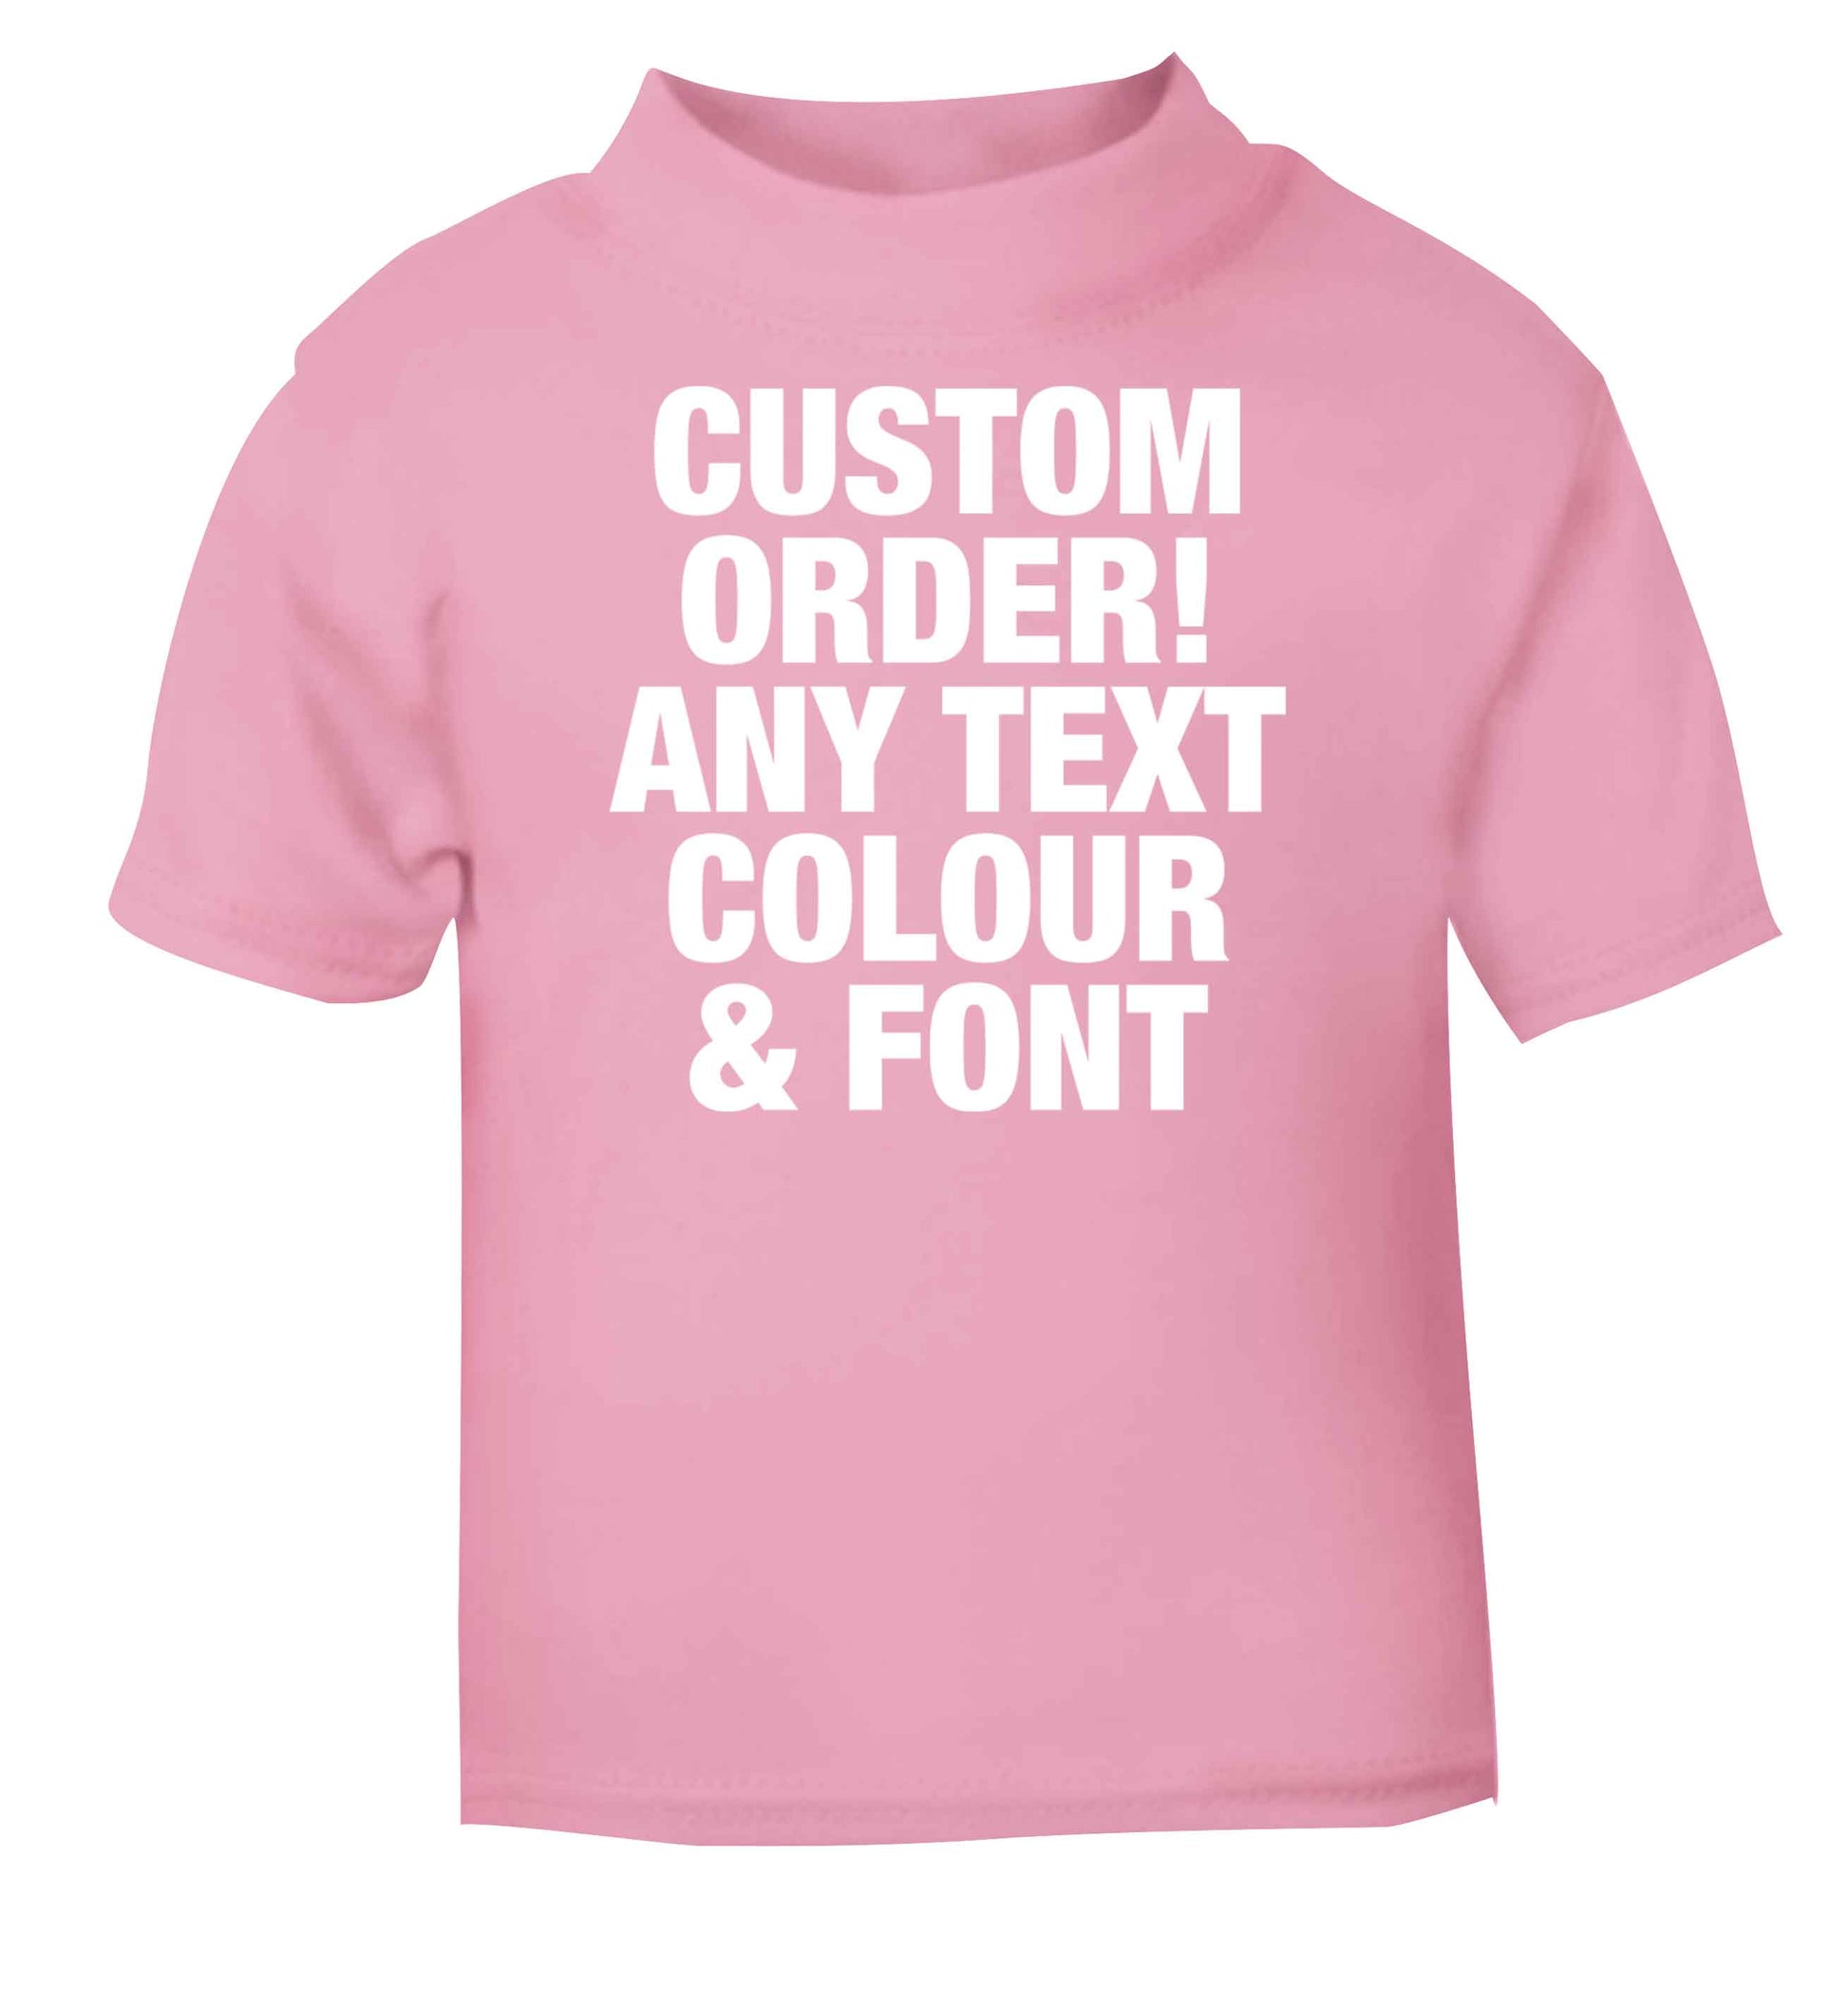 Custom order any text colour and font light pink baby toddler Tshirt 2 Years